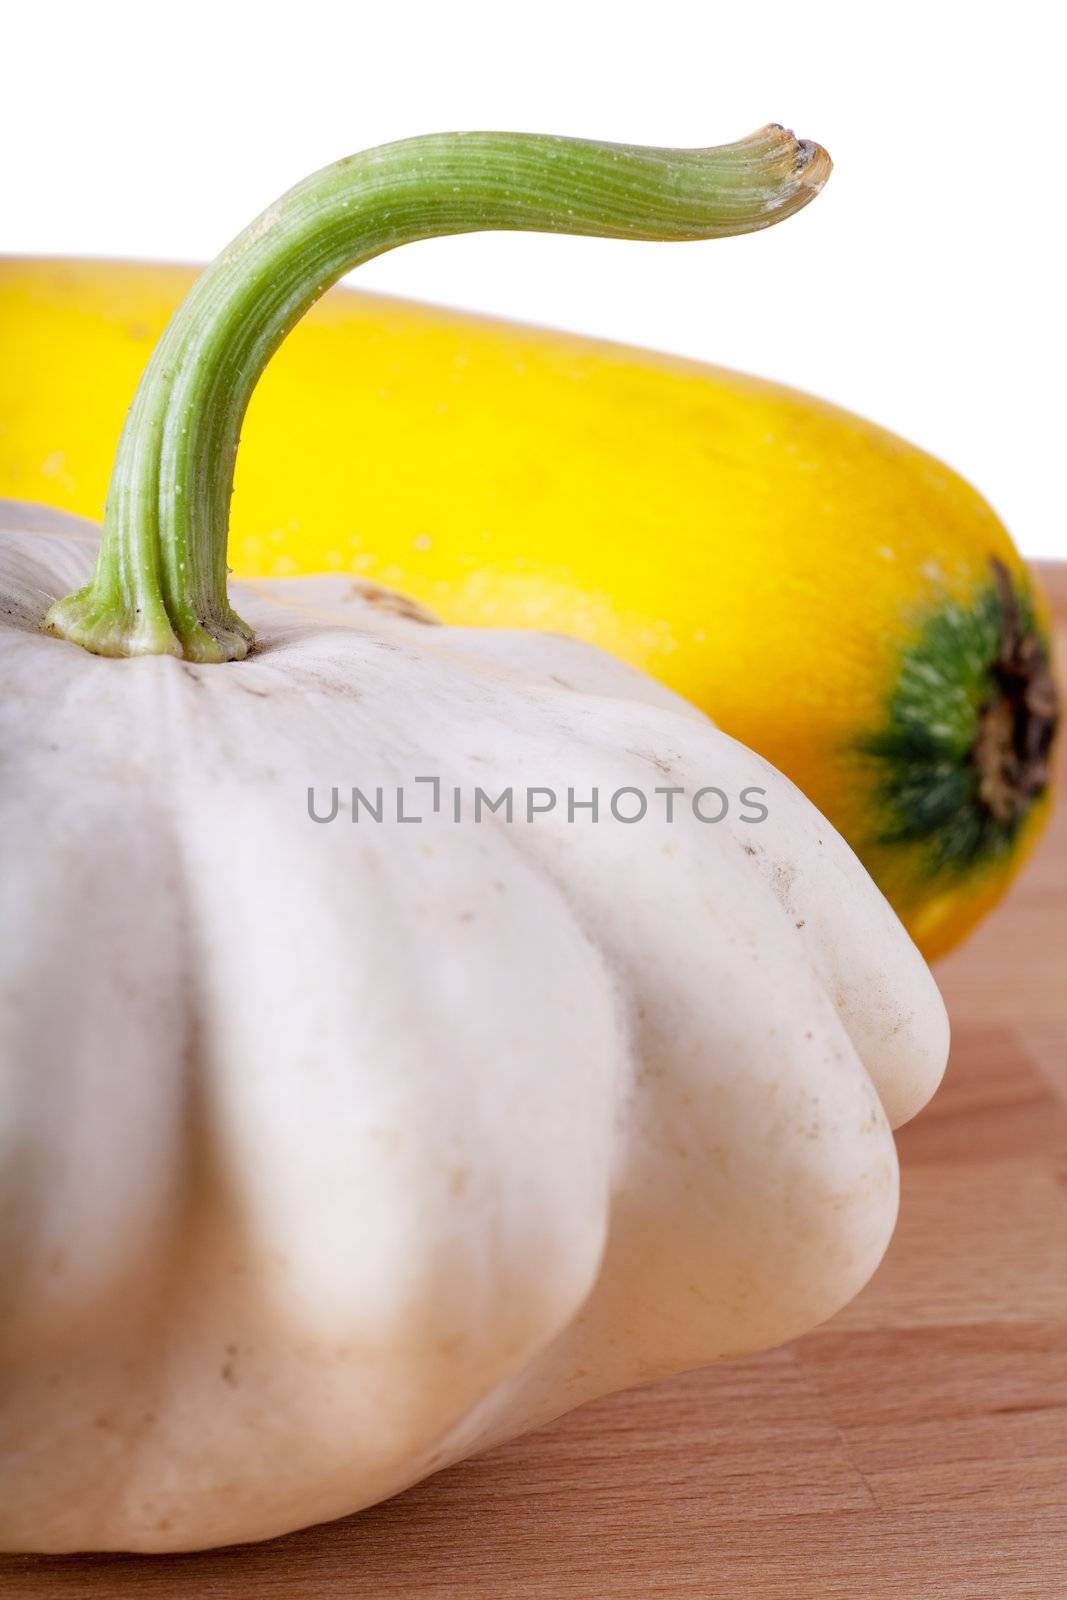 Pattypan and marrow vegetables on a wooden table